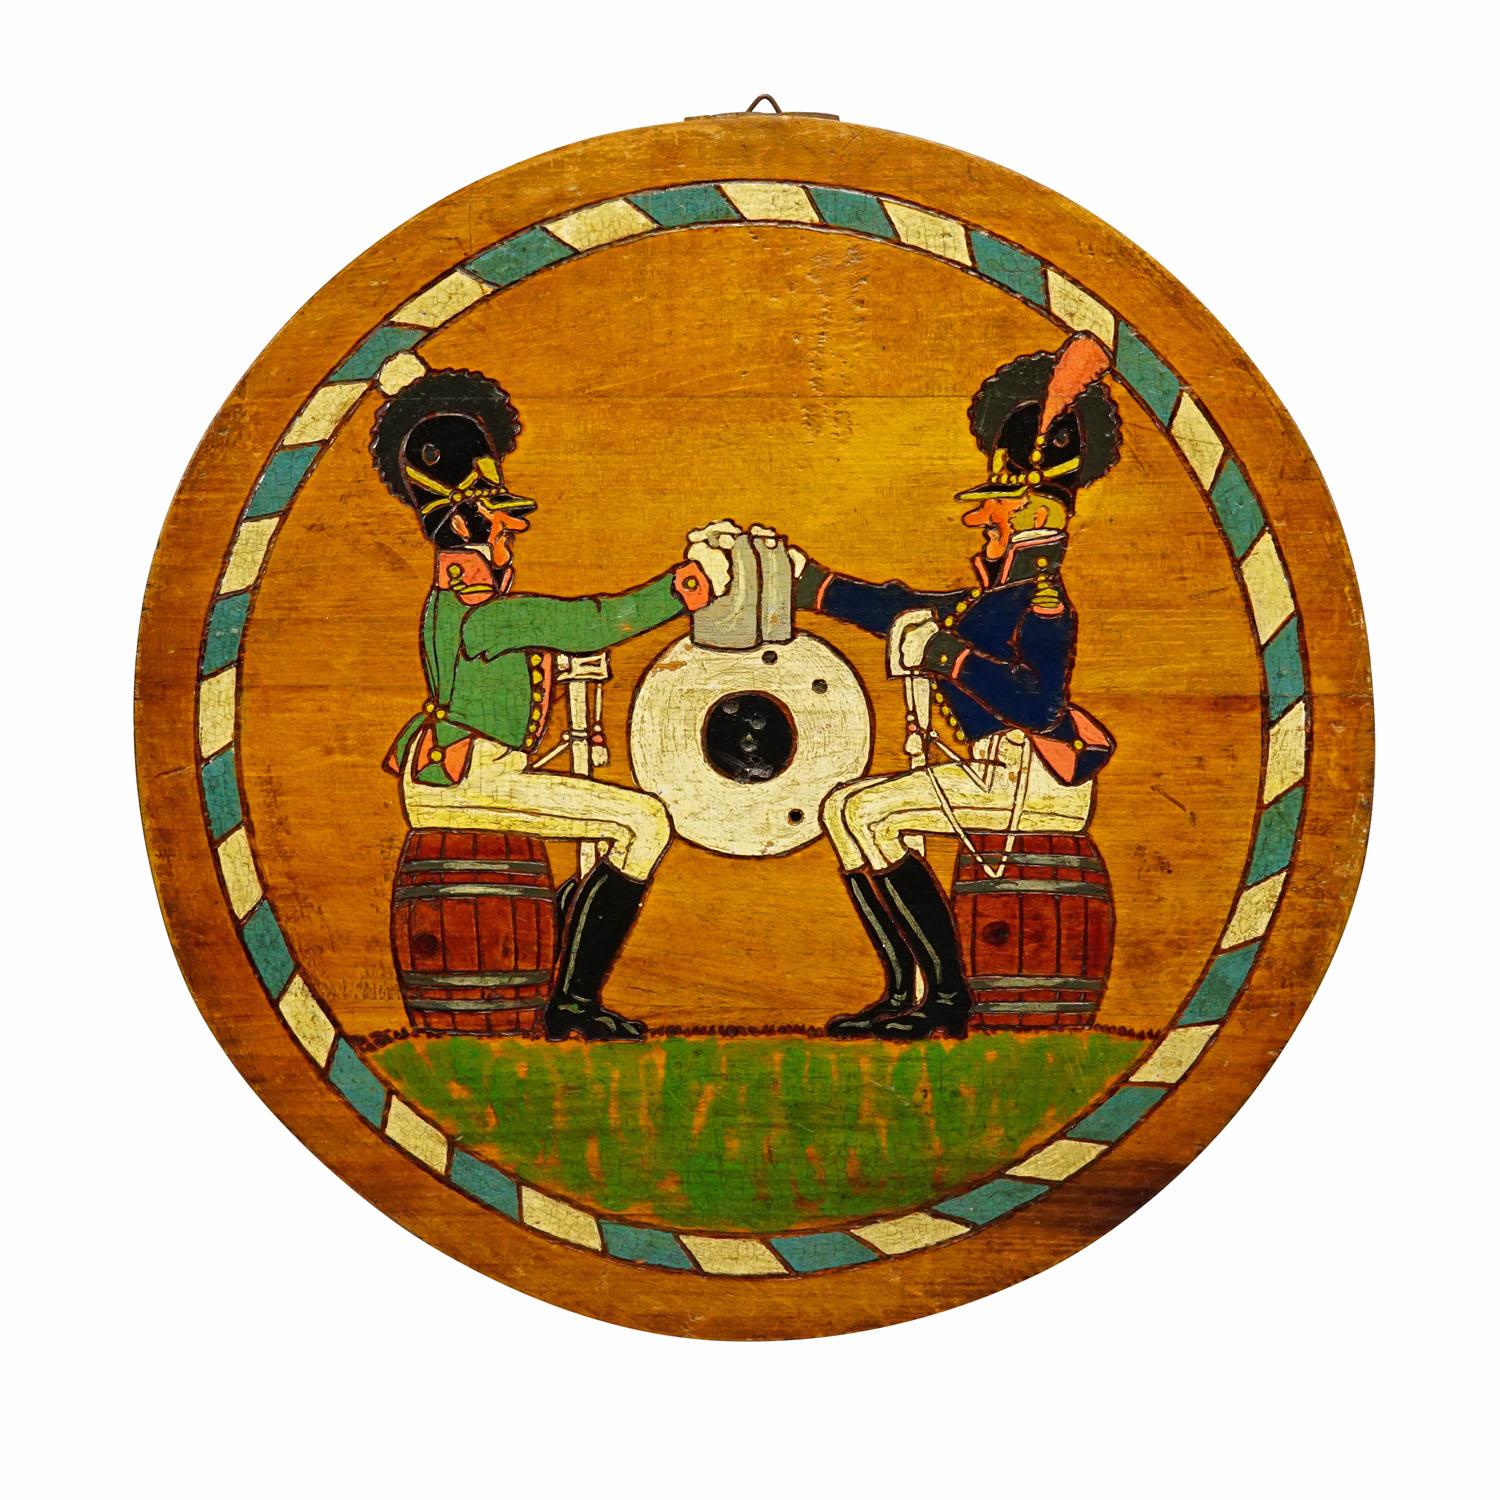 Antique Marksman Shooting Target Plaque with Soldiers

An antique wooden shooting target plaque with a handpainted illustration of two soldiers of the Victorian age, a Prussian and an Austrian, drinking beer. Germany around 1900. 

Measures:
Height: